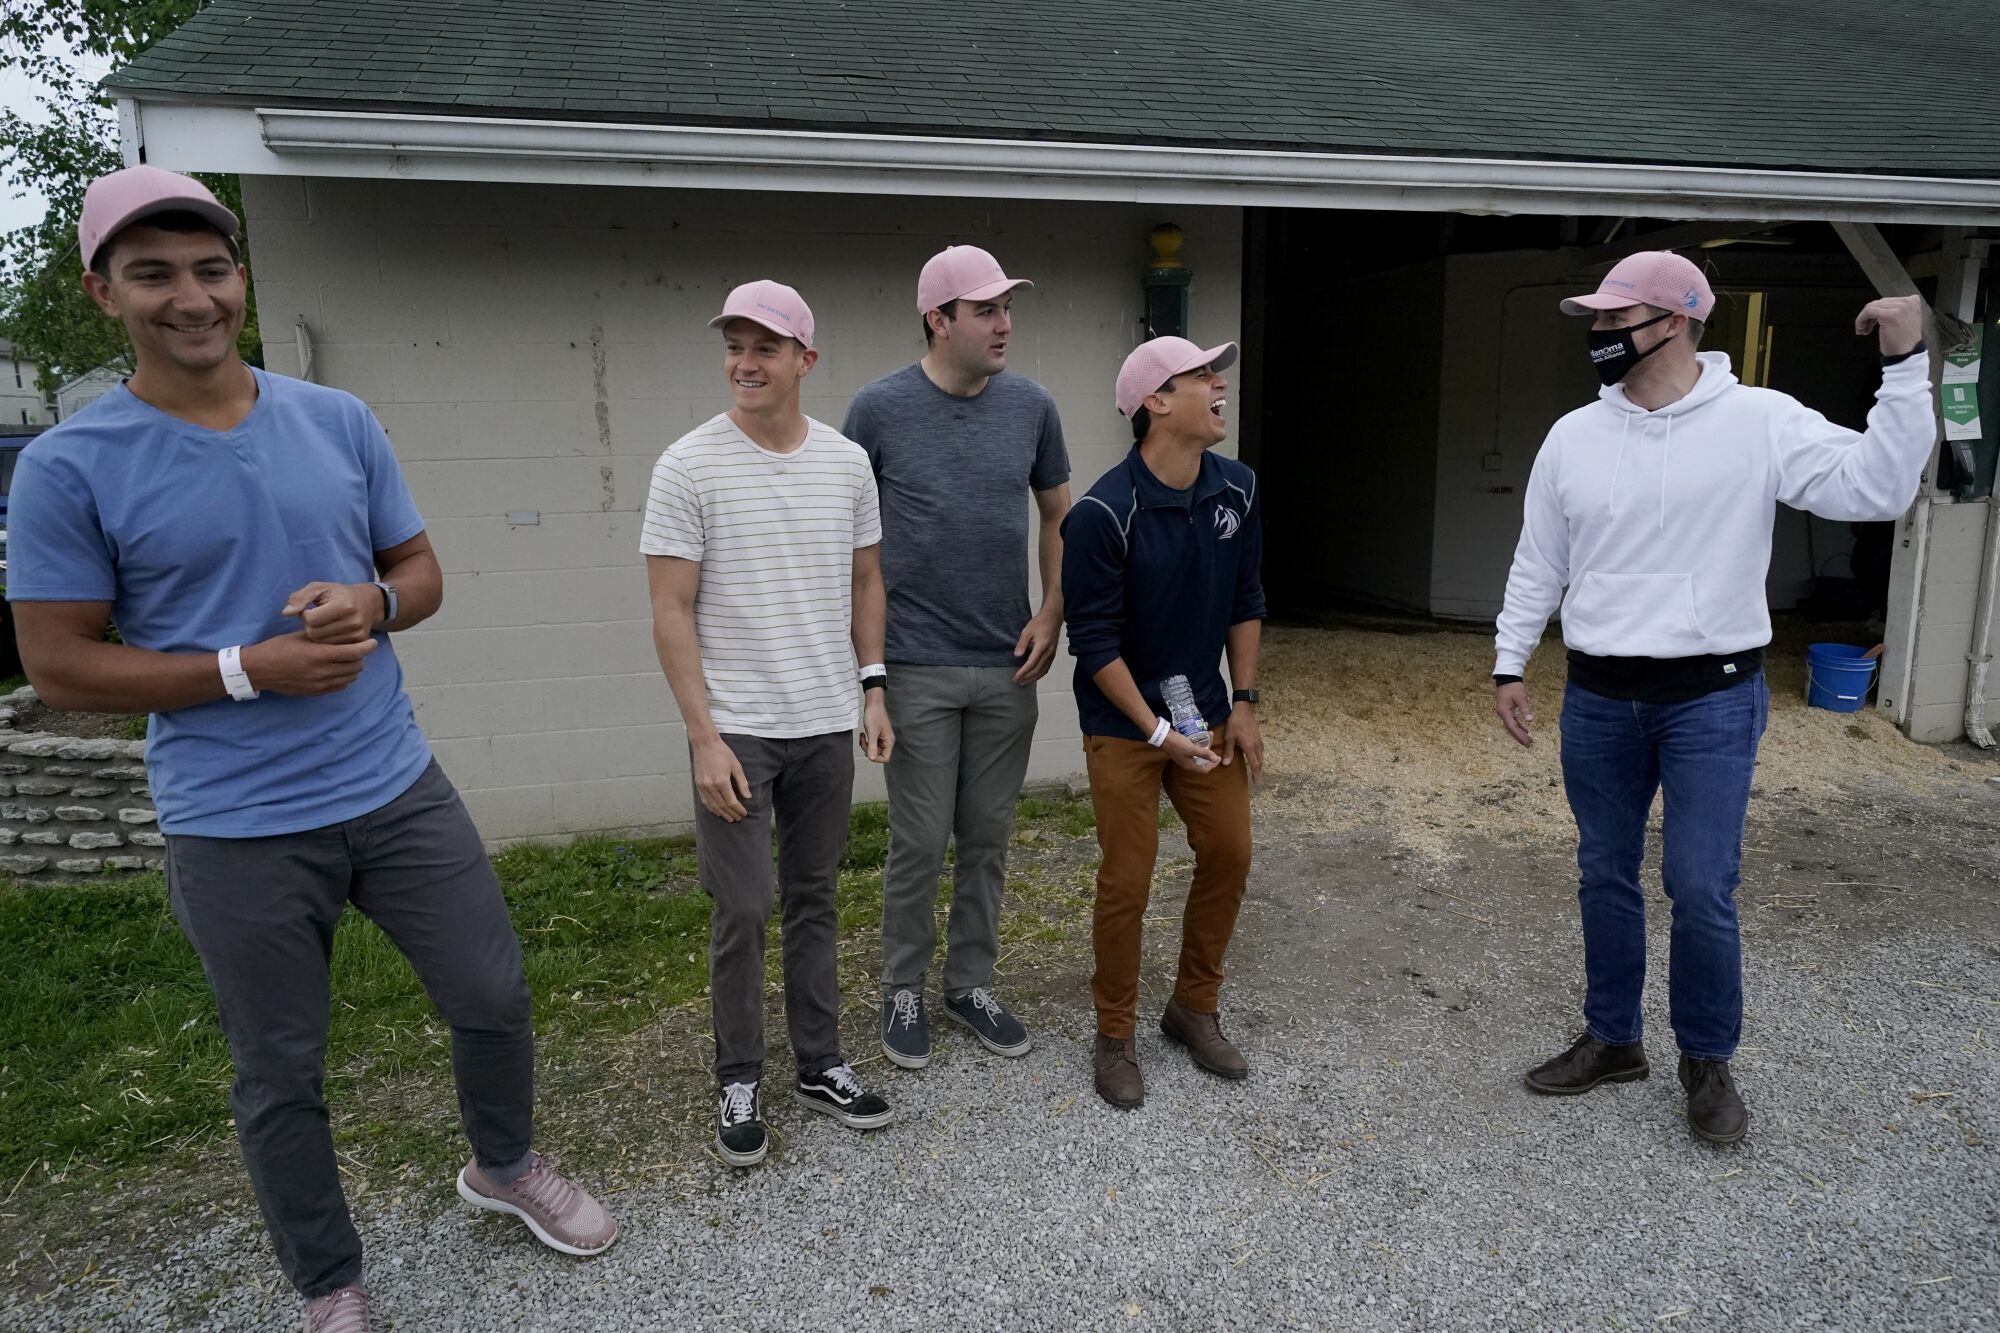 Former teammates Dan Giovacchini, Reiley Higgins, Alex Quoyeser, Patrick O'Neill and Eric Armagost stand outside a barn 